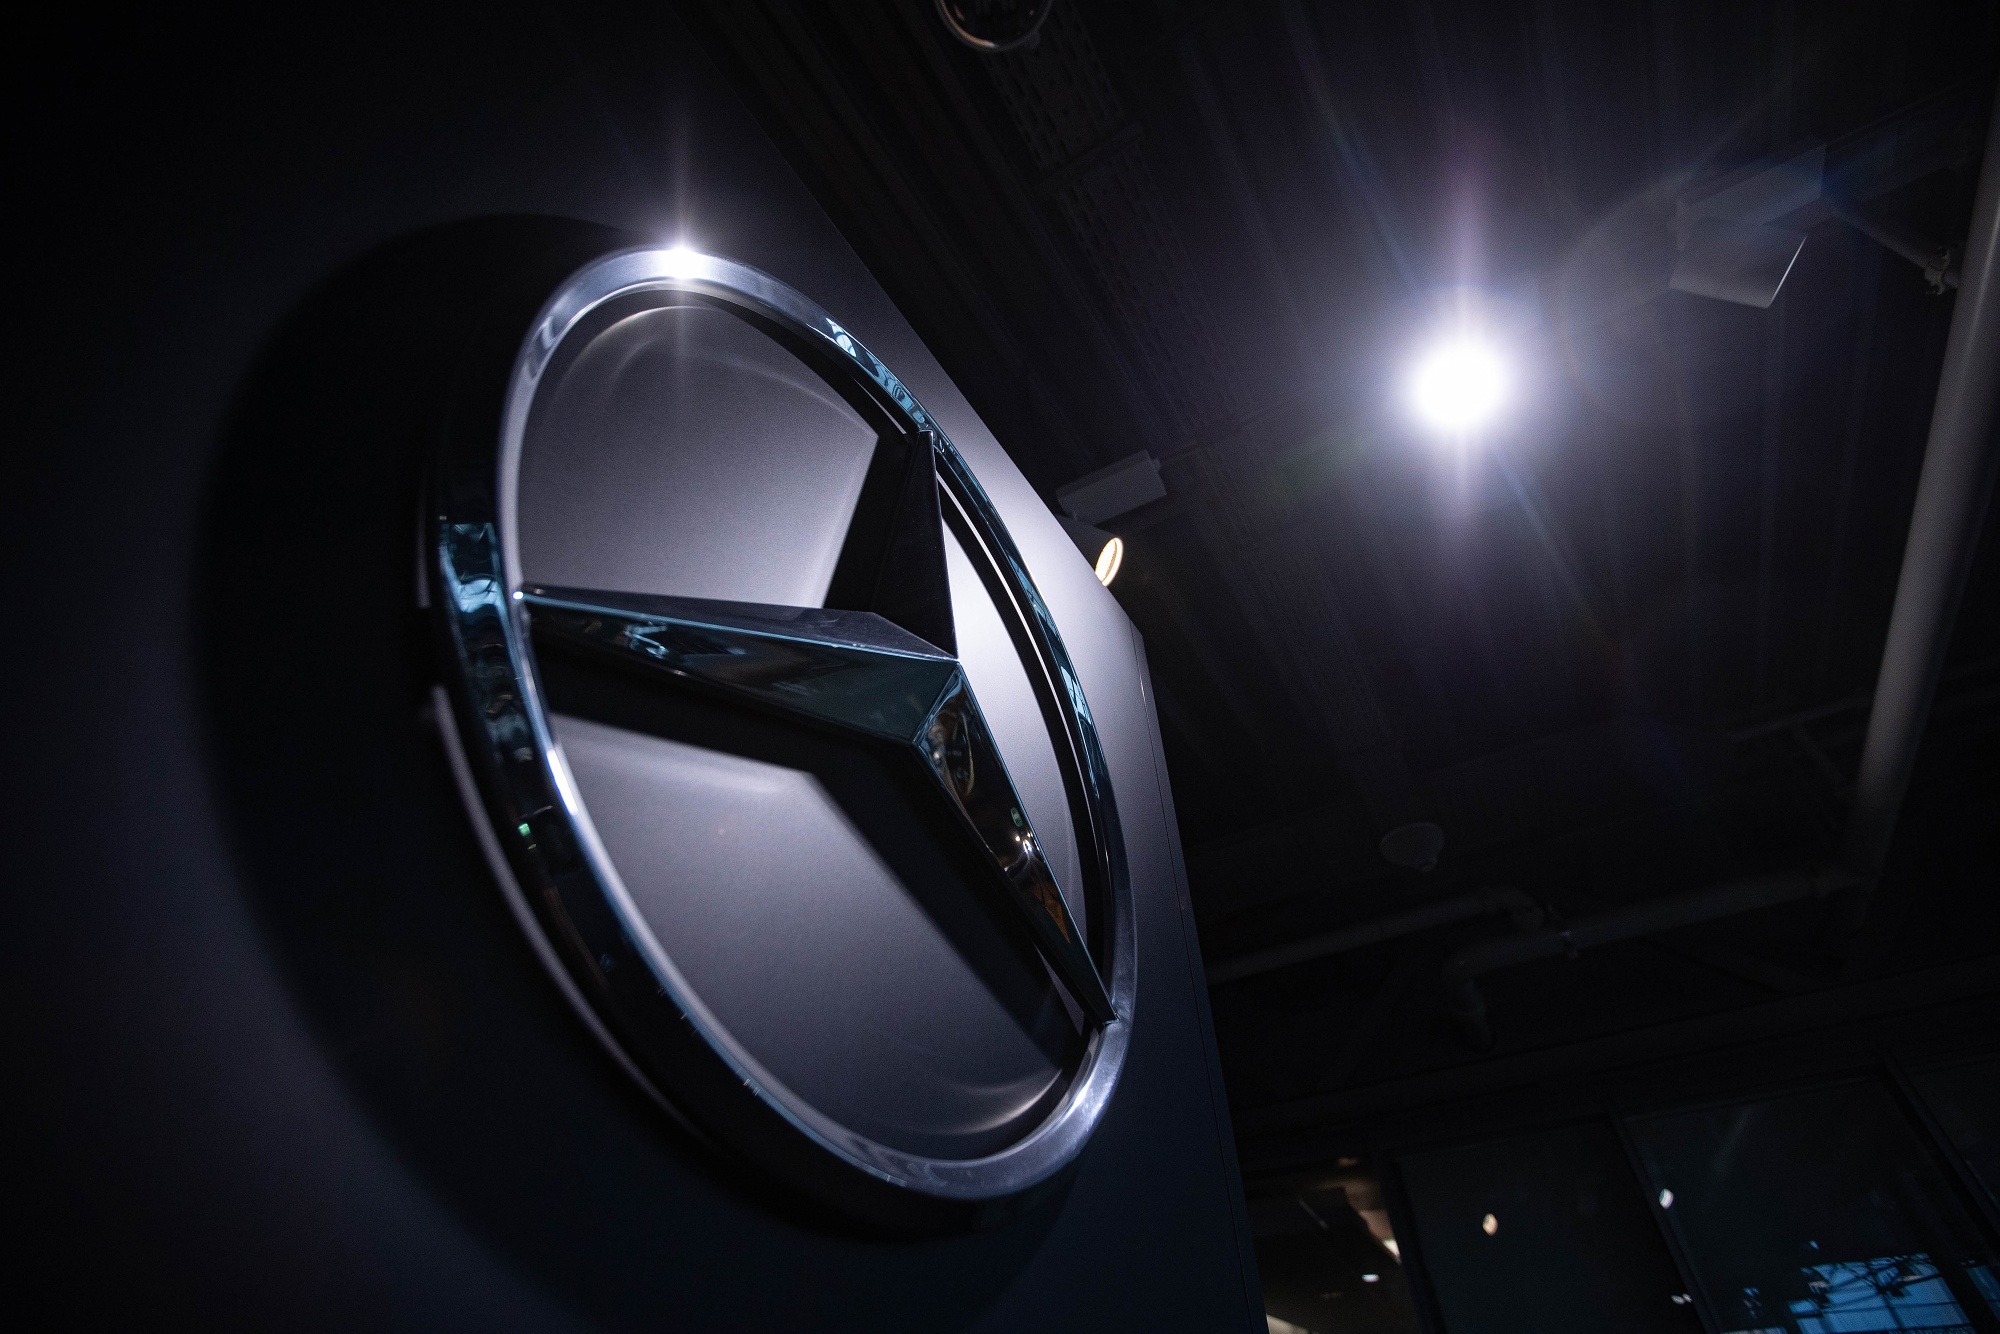 Mercedes-Benz Showrooms Ahead of Daimler AG Earnings